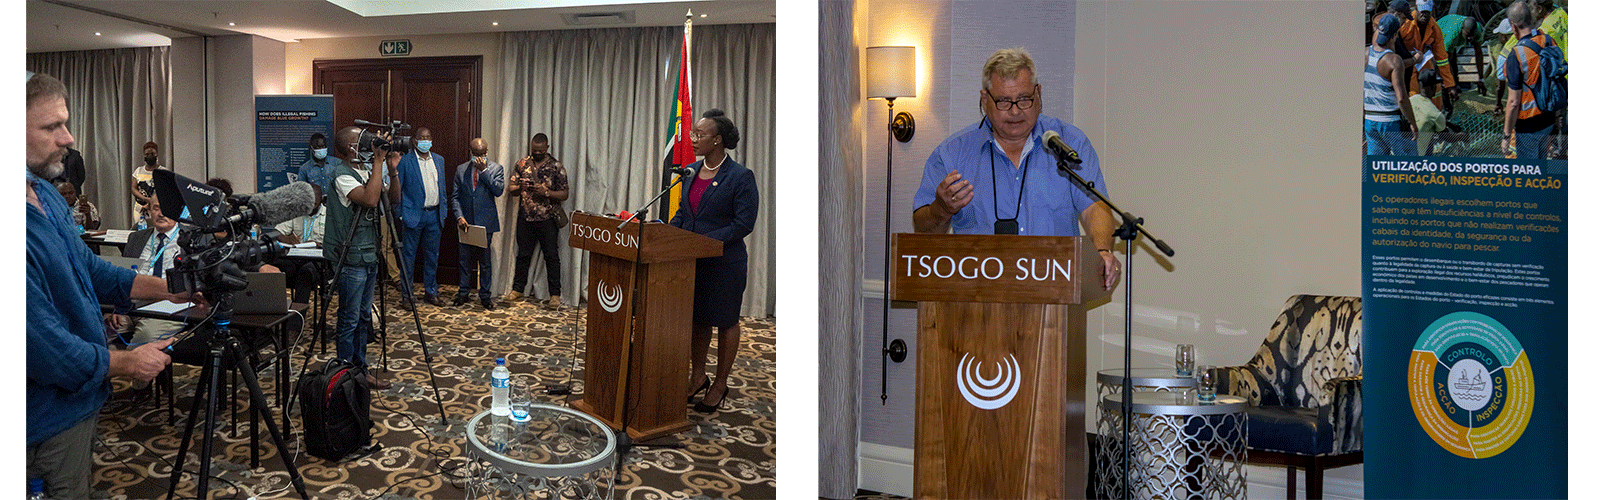 Mozambique’s Minister of Sea, Inland Waters and Fisheries, Augusta Maita, demonstrated her support to fight illegal, unreported and unregulated (IUU) fishing